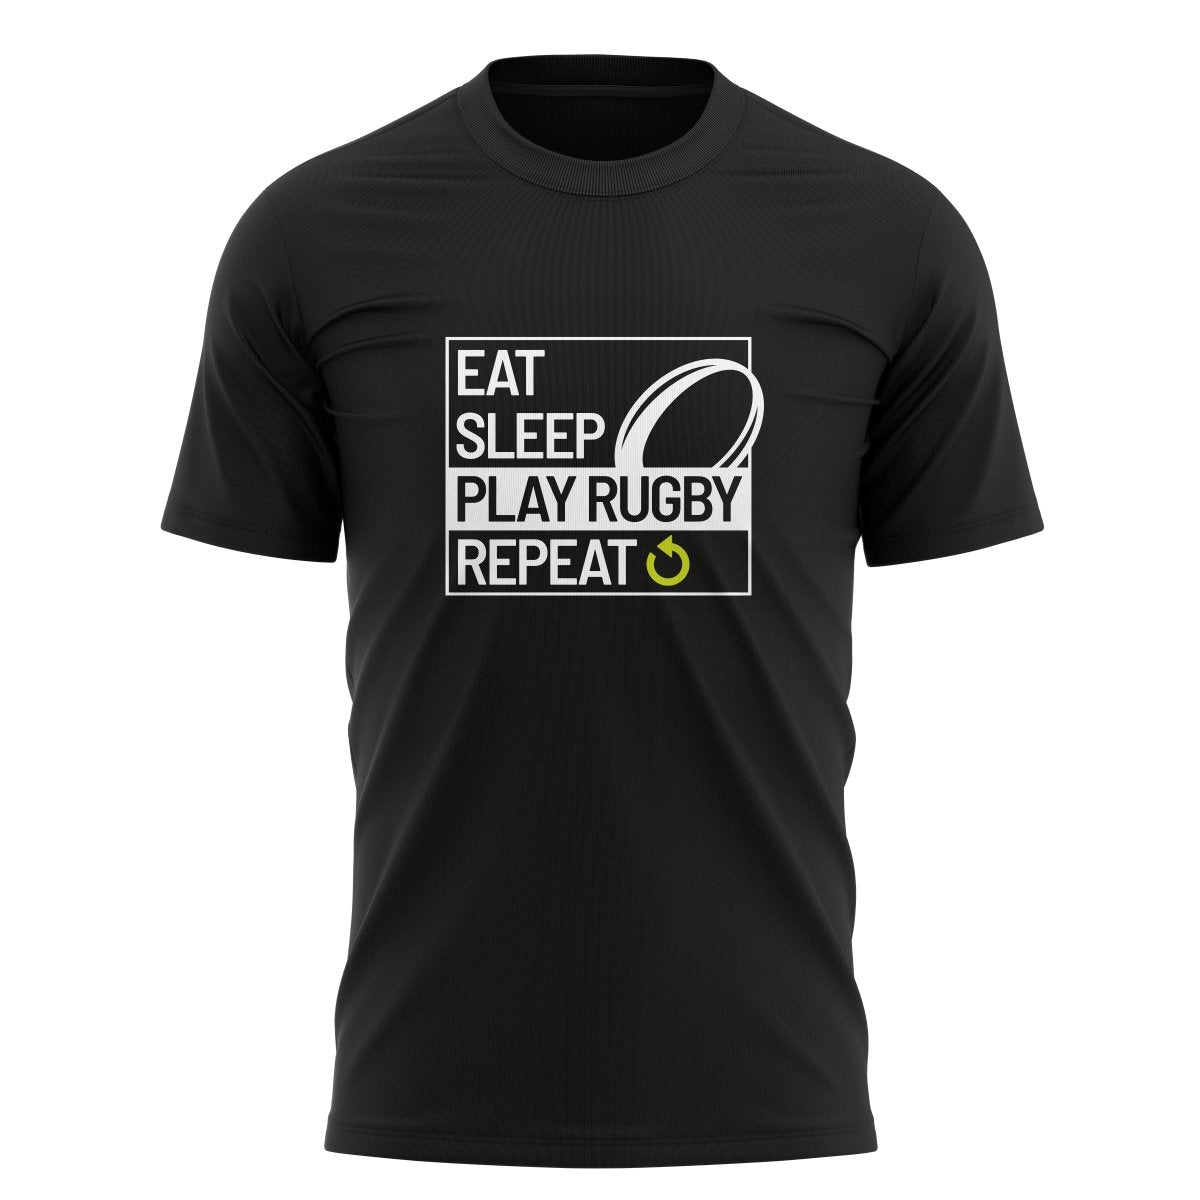 Eat Sleep Rugby Graphic Tee - www.therugbyshop.com www.therugbyshop.com MEN&#39;S / BLACK / S SANMAR TEES Eat Sleep Rugby Graphic Tee